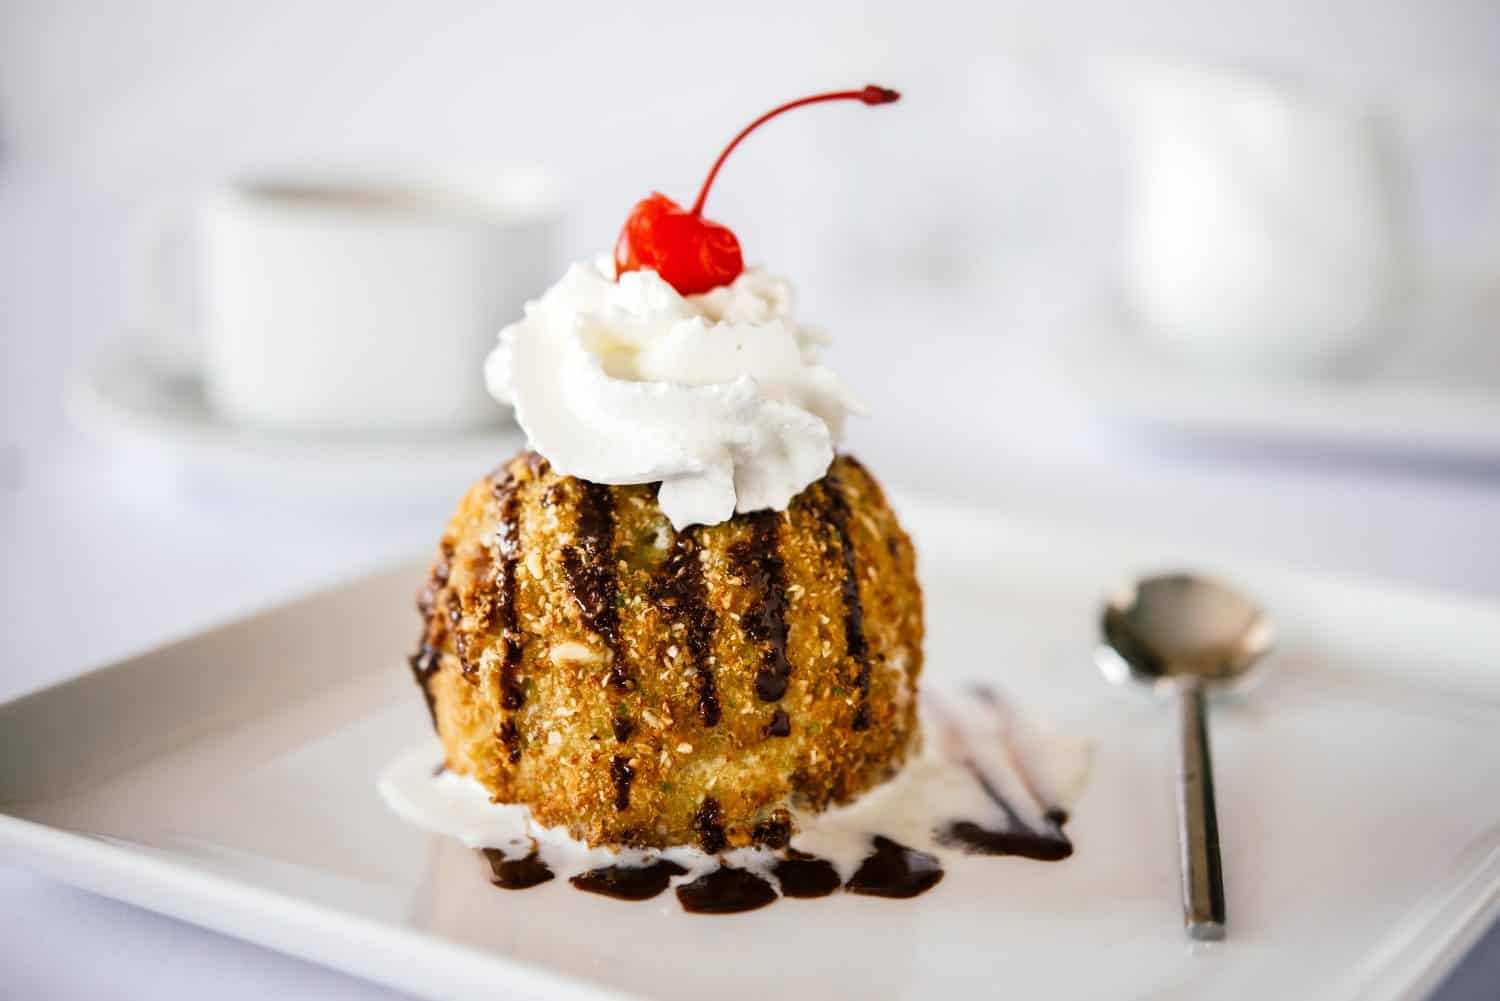 Fried ice cream served on white plate